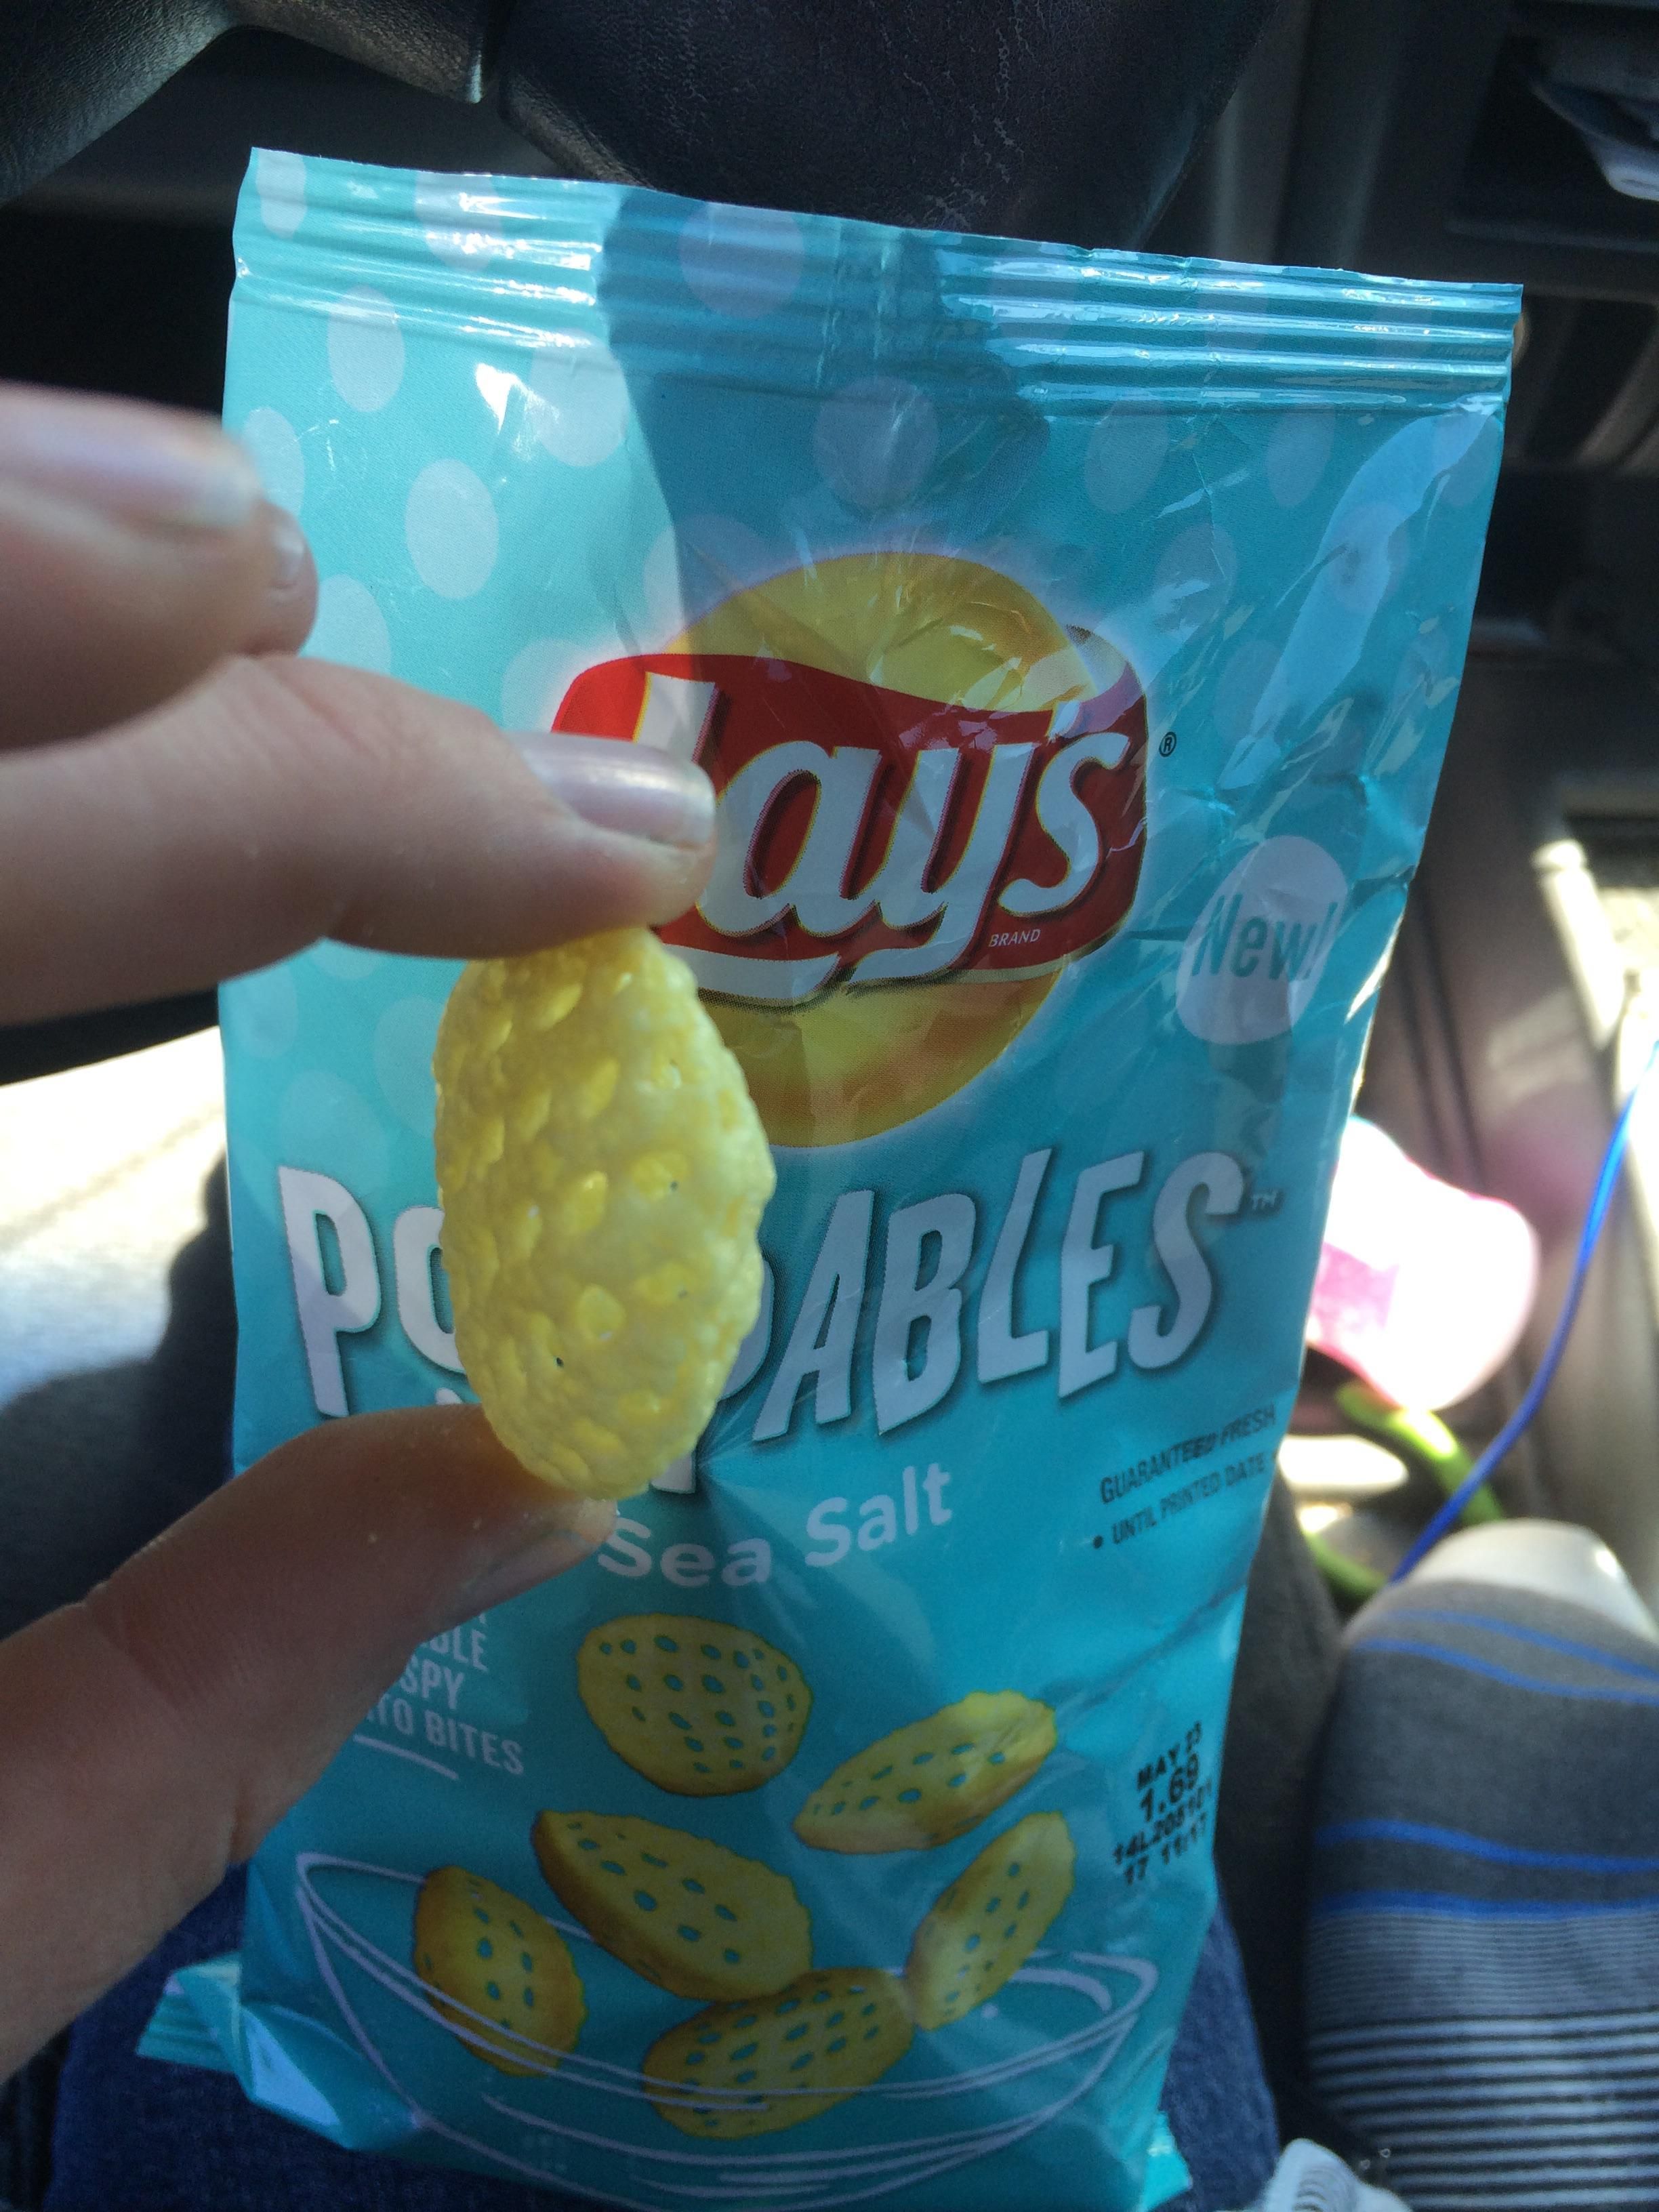 Lays has officially came up with a way to sell more air in their chip bags by making air filled chips. And I fell for it.